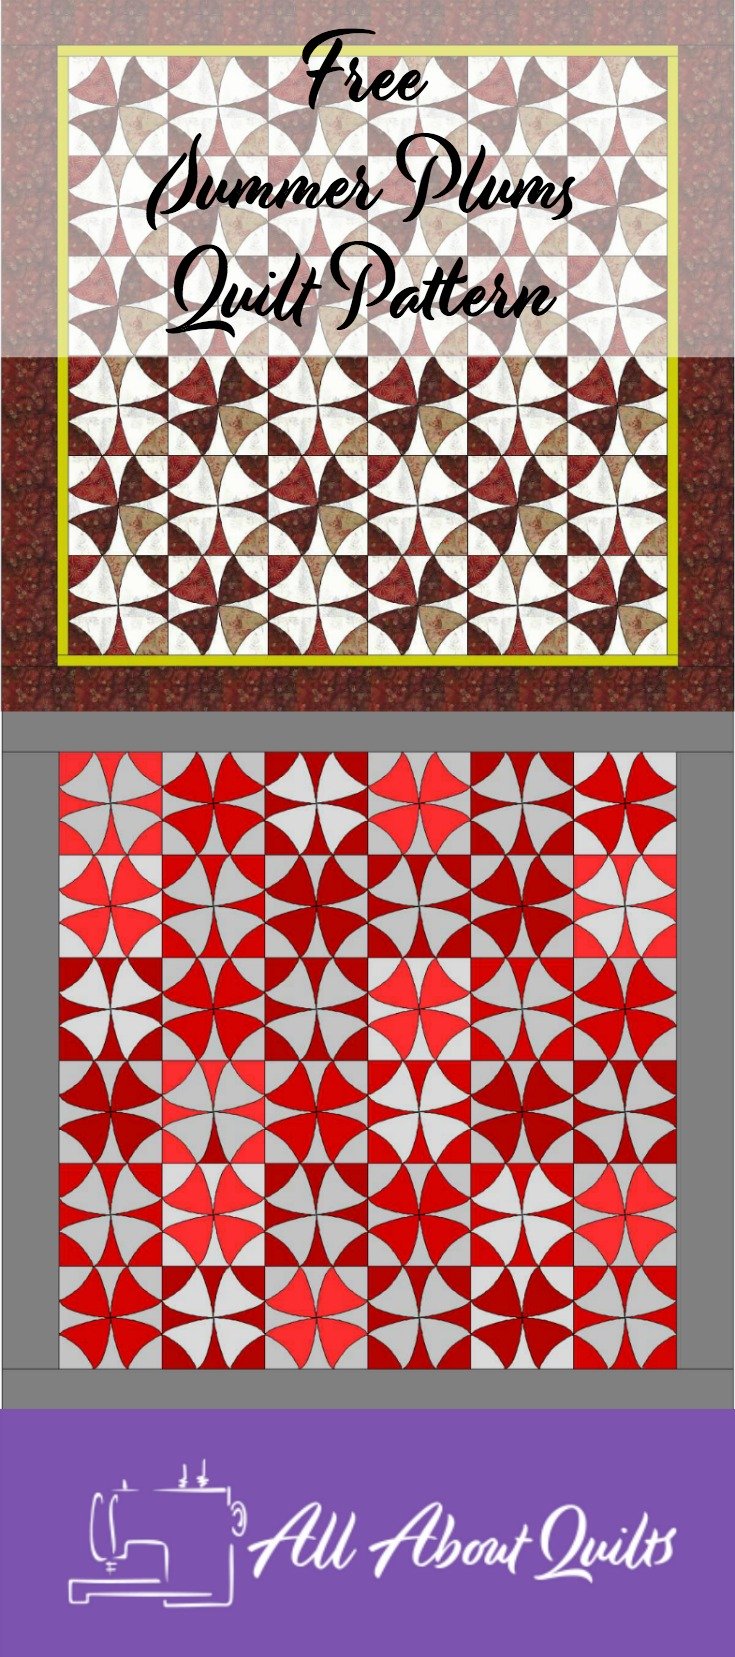 Free Summer Plums quilt pattern